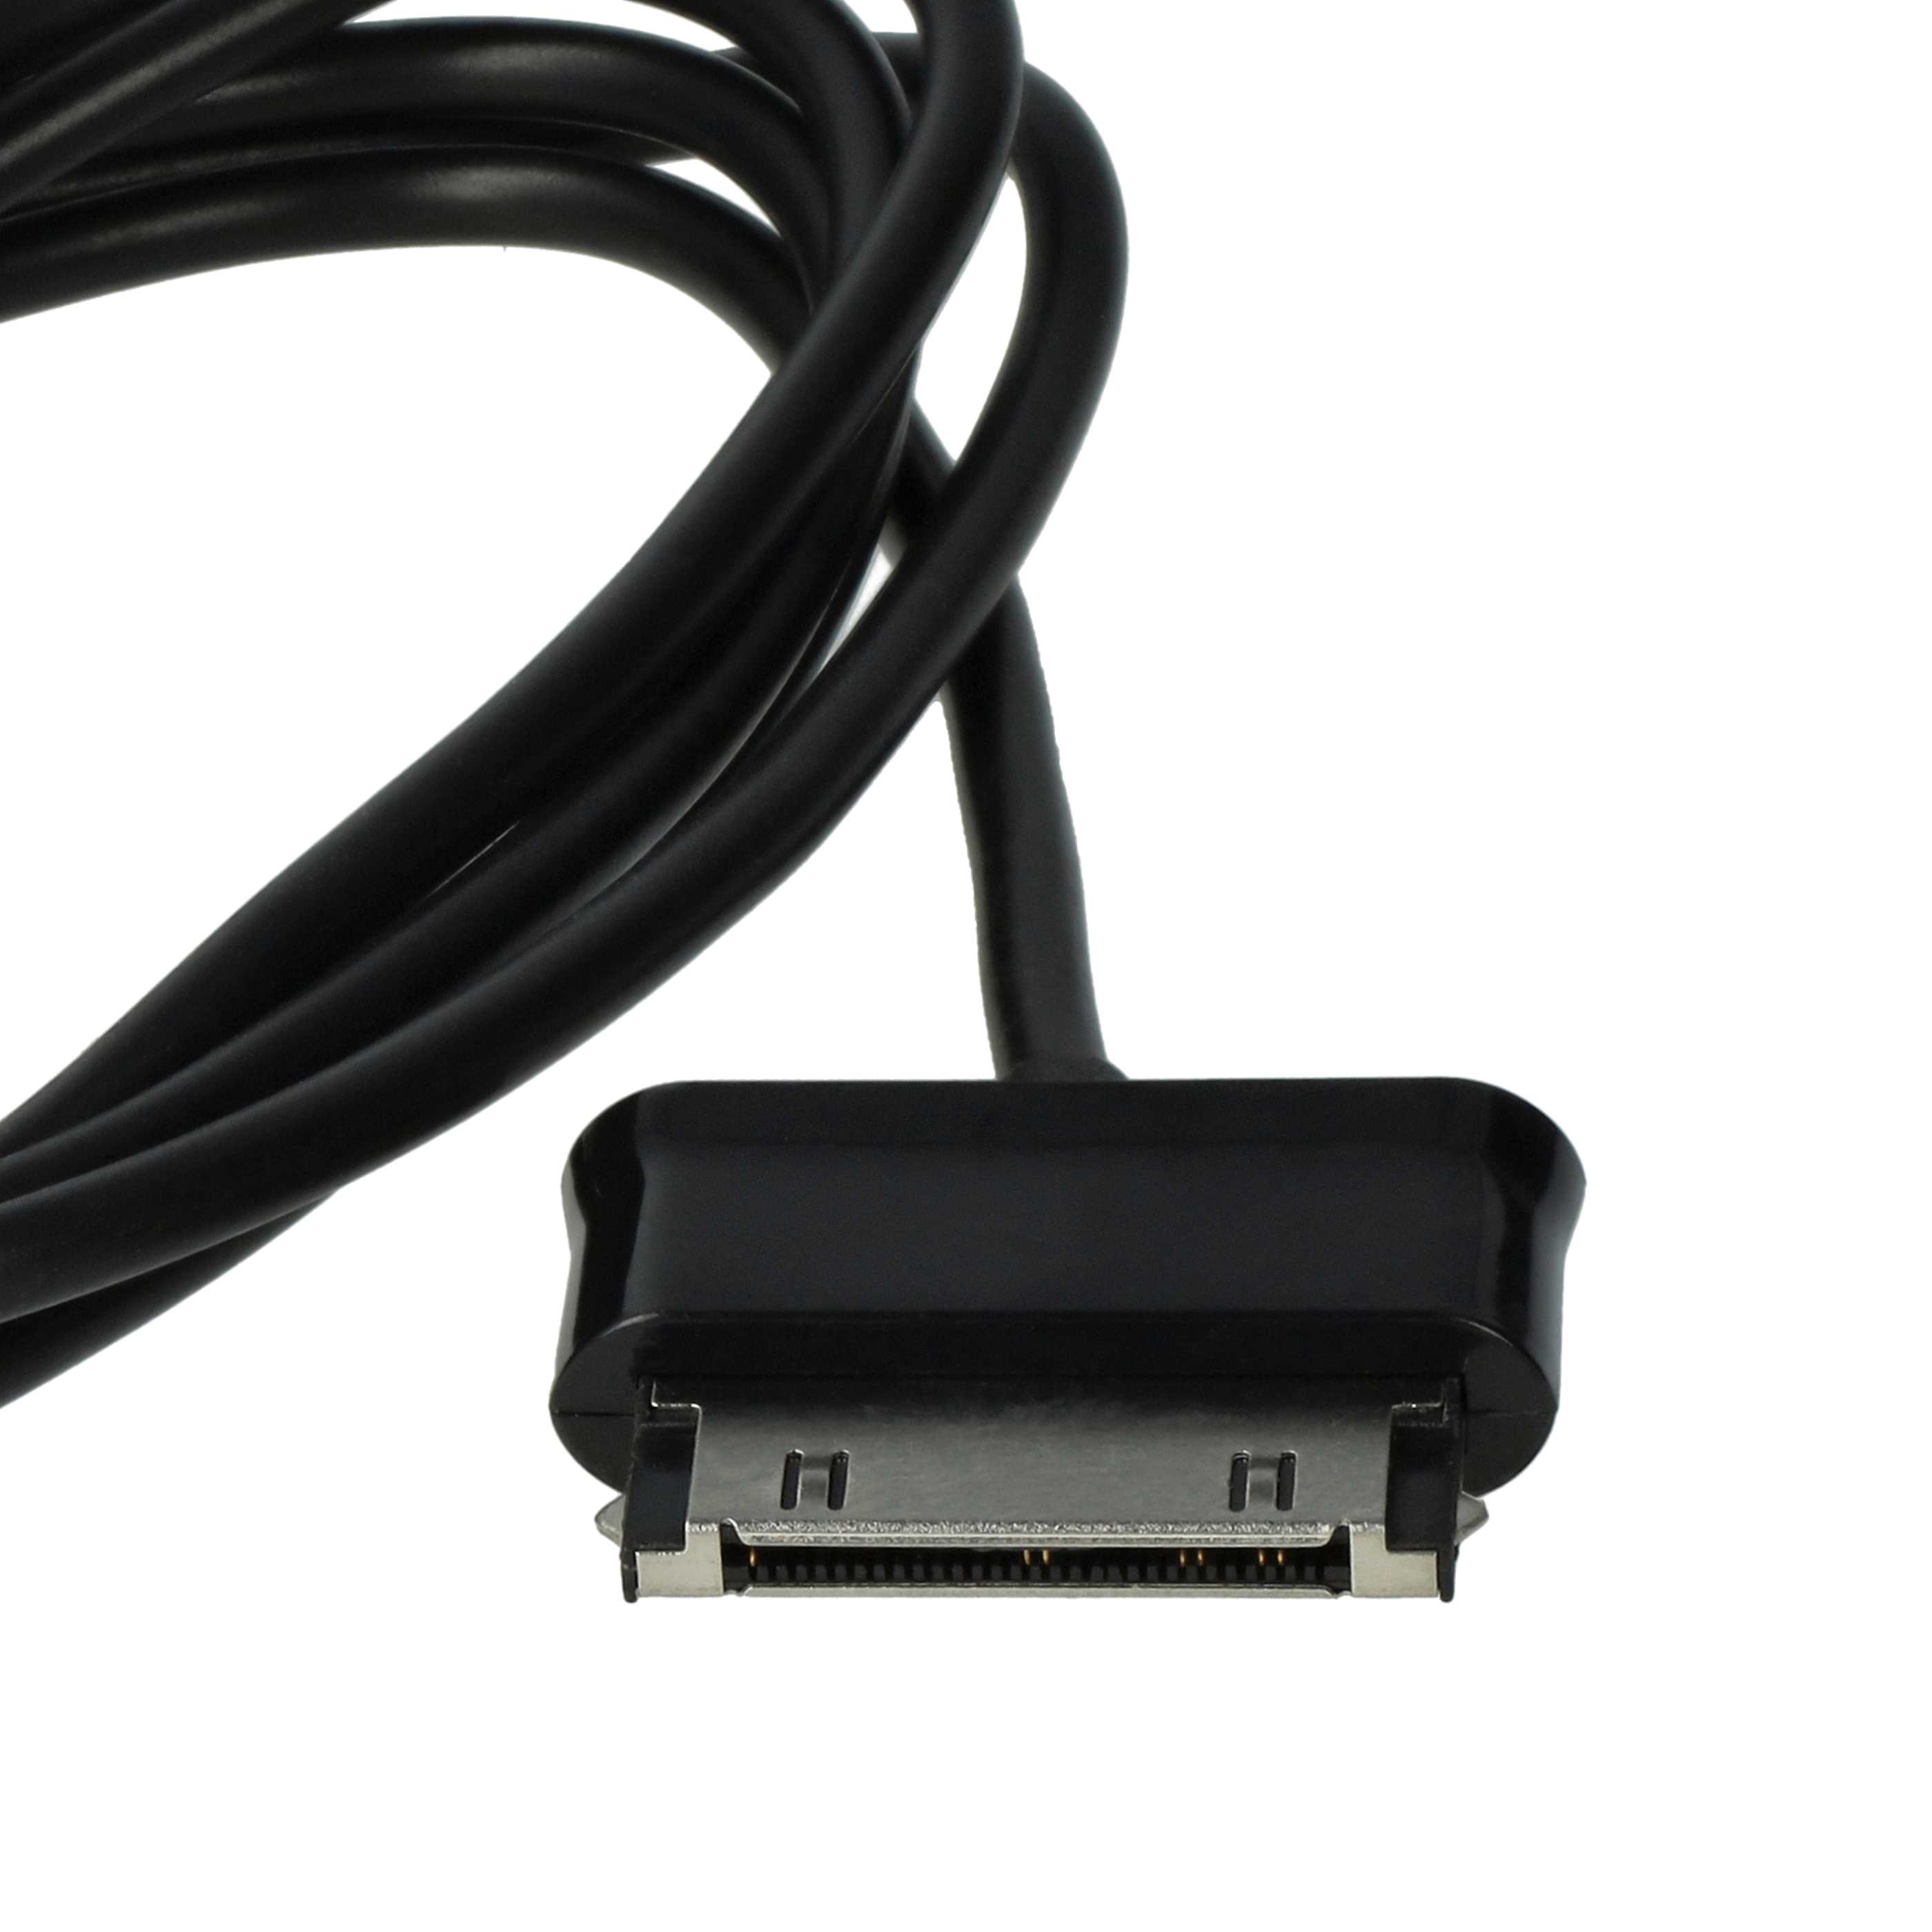 vhbw USB Data Cable Tablet - 2in1 Charging Cable (Standard-USB Type A to Tablet) 120cm Black 